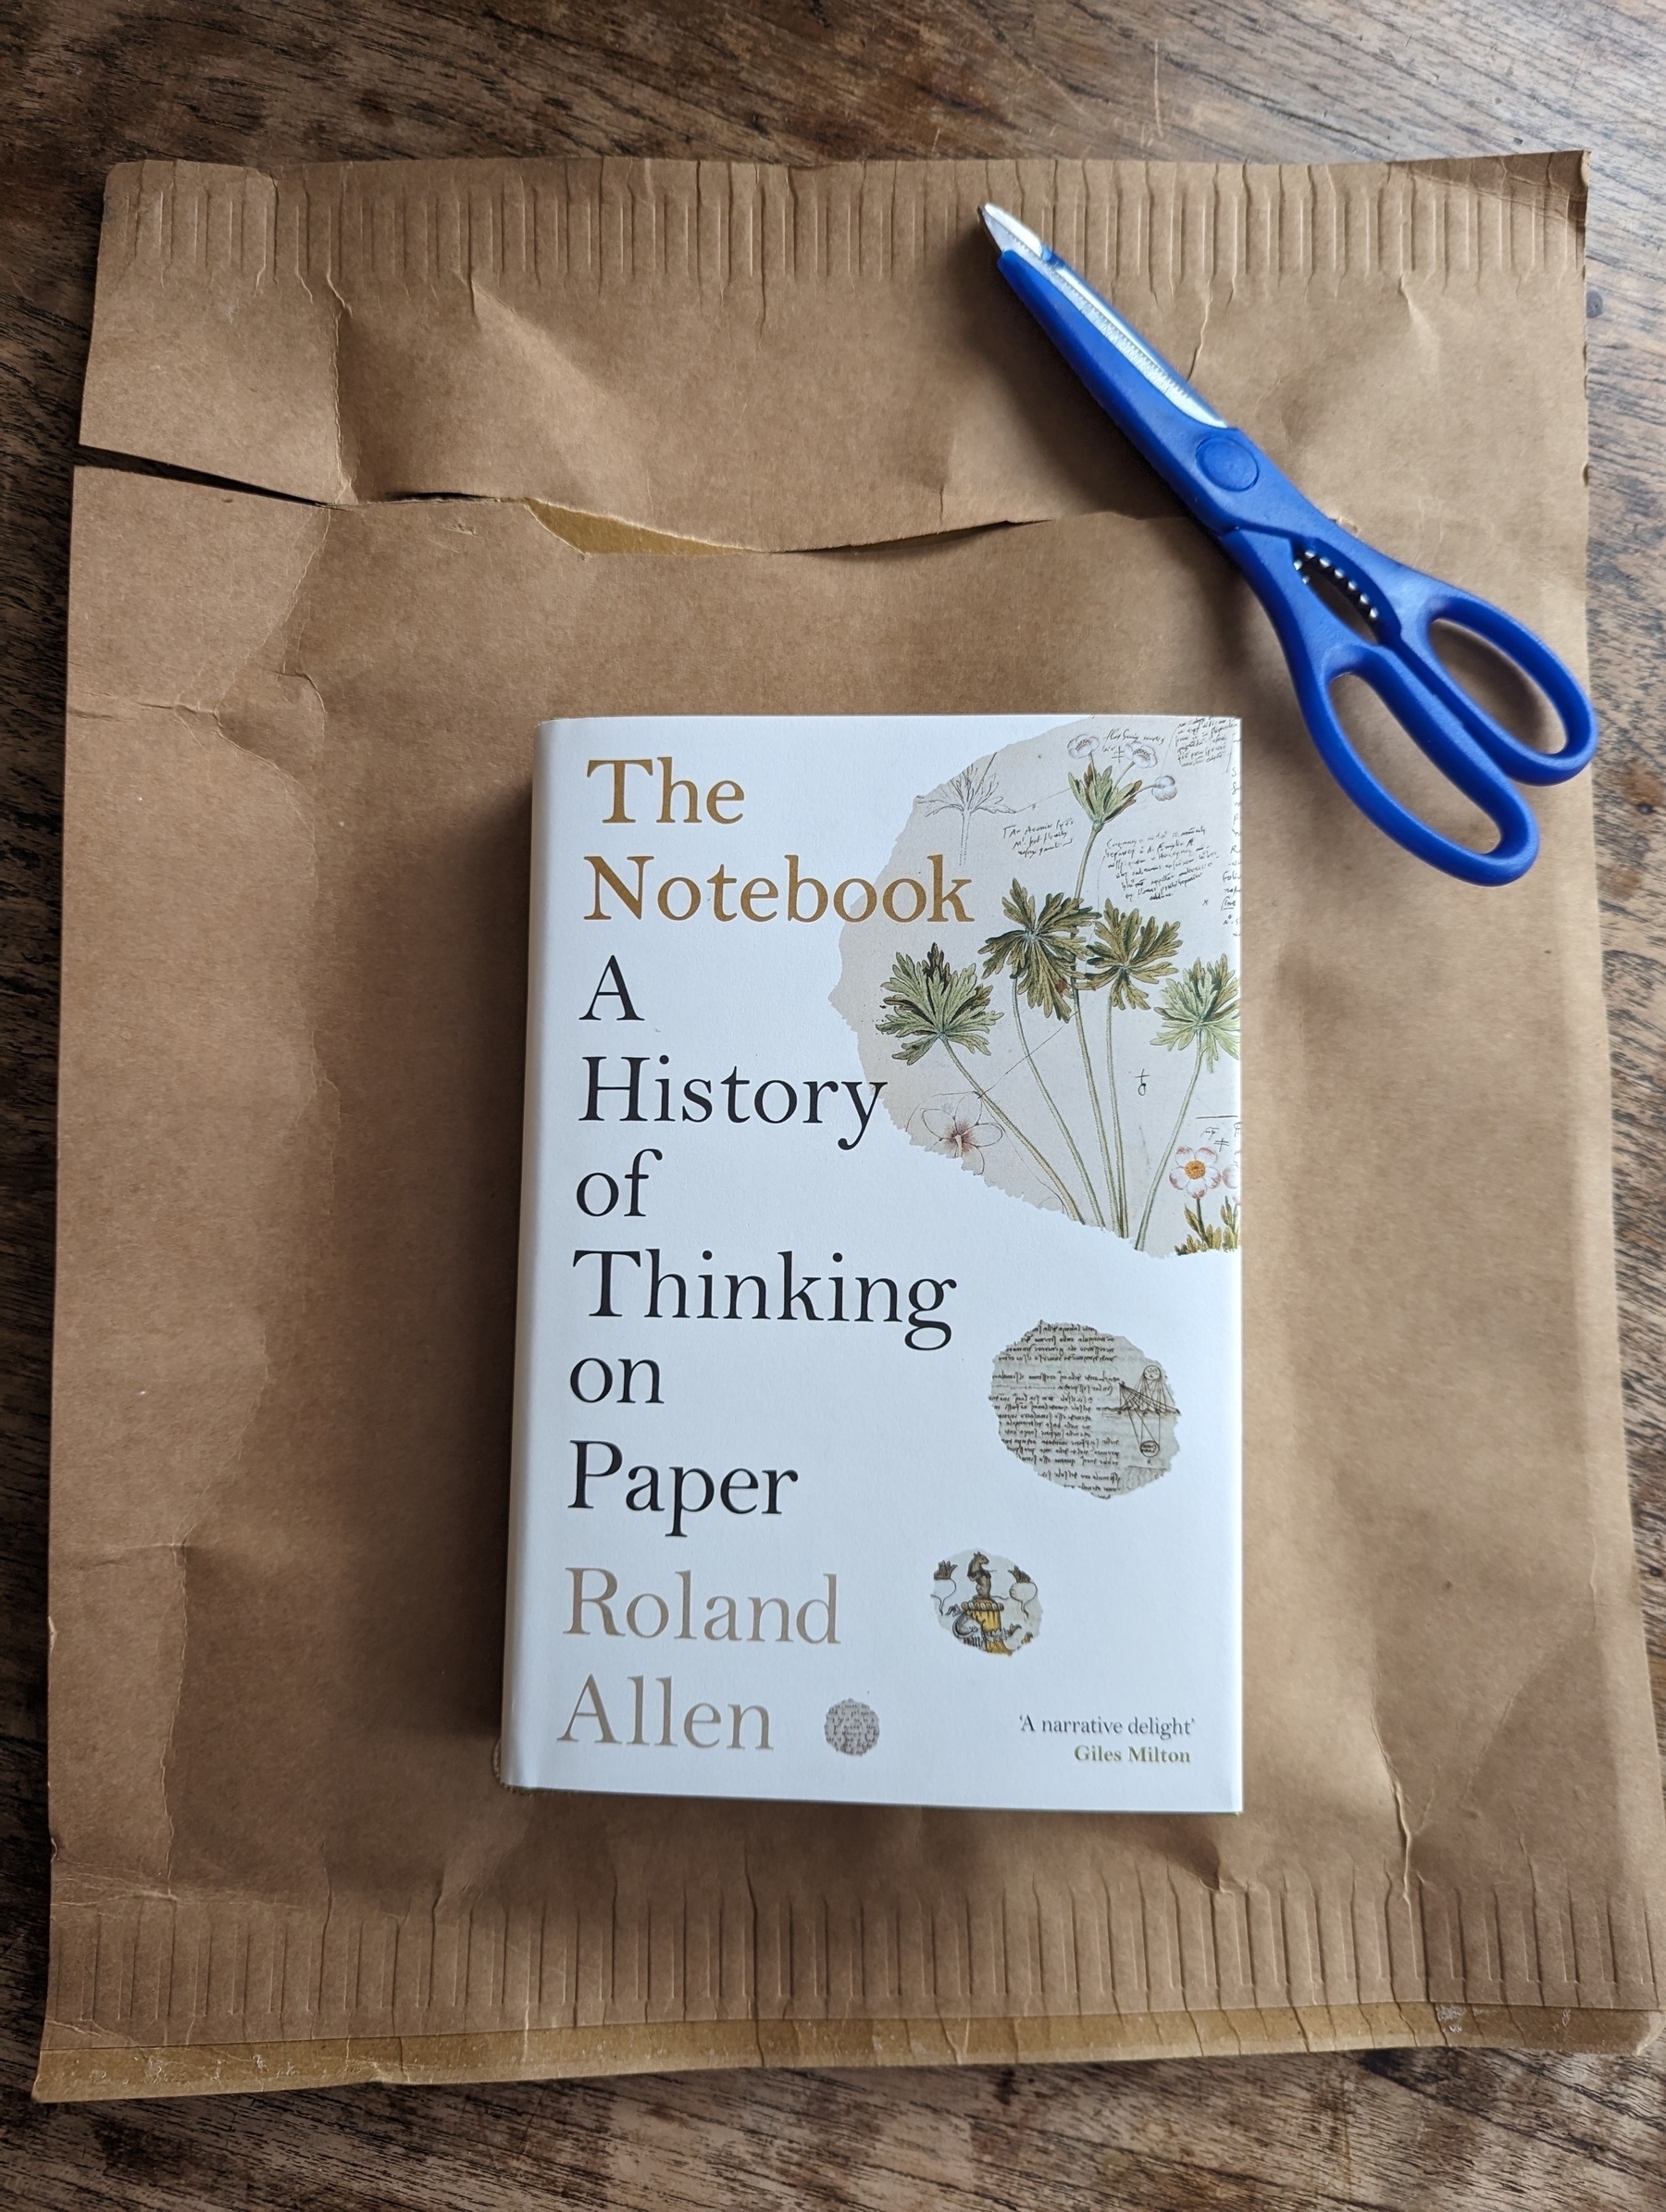 The cover of Roland Allen’s book, The Notebook. A History of Thinking on Paper. Beneath it lies the brown paper envelope it arrived in, and beside it sits the blue pair of scissors that opened the package.